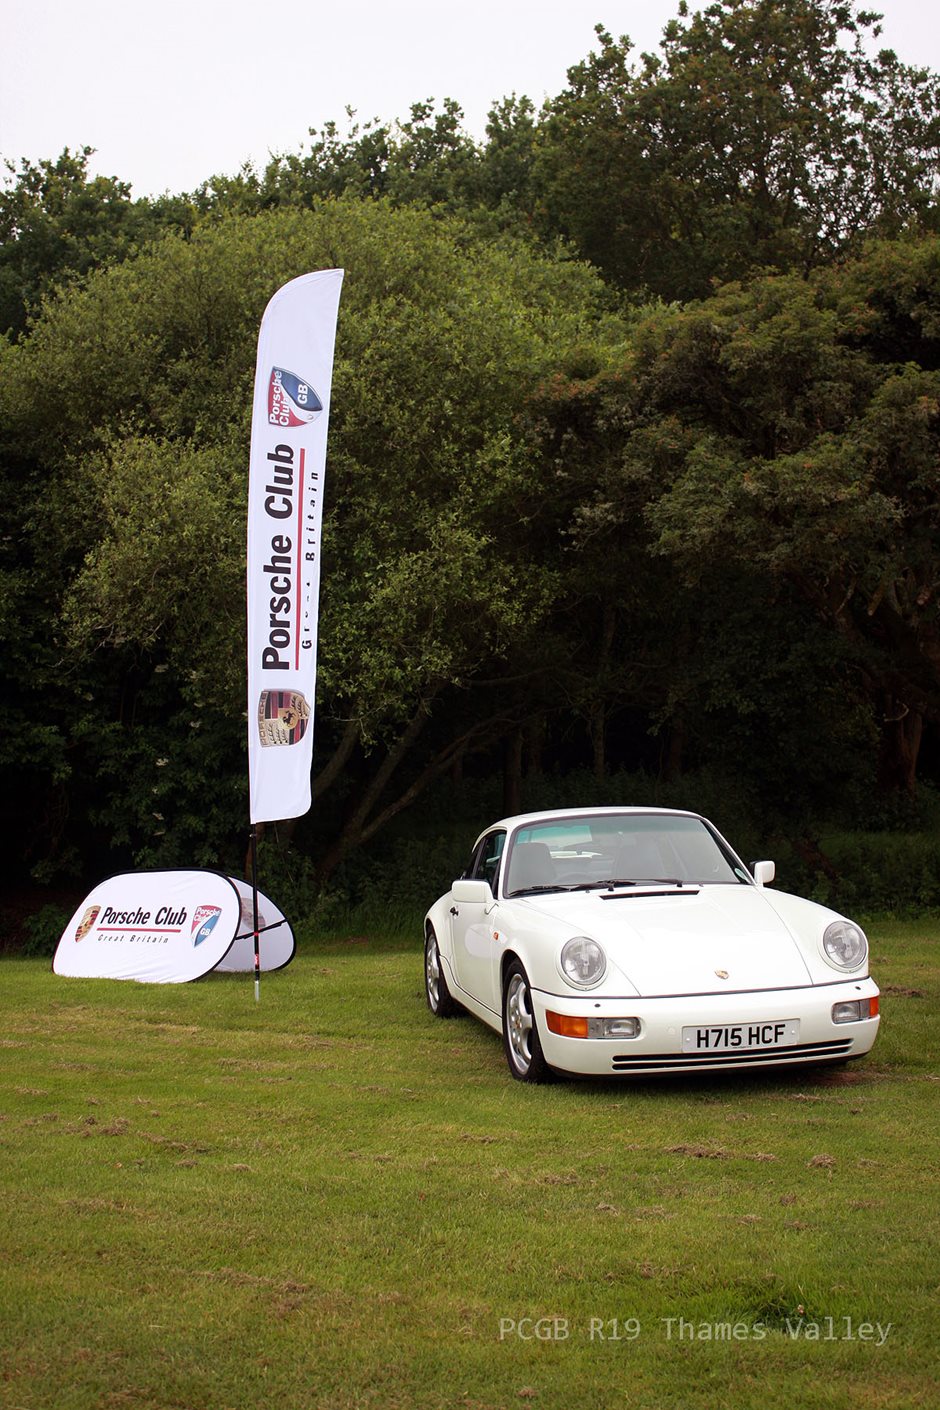 Photo 11 from the Classics at the Clubhouse - Aircooled Edition gallery